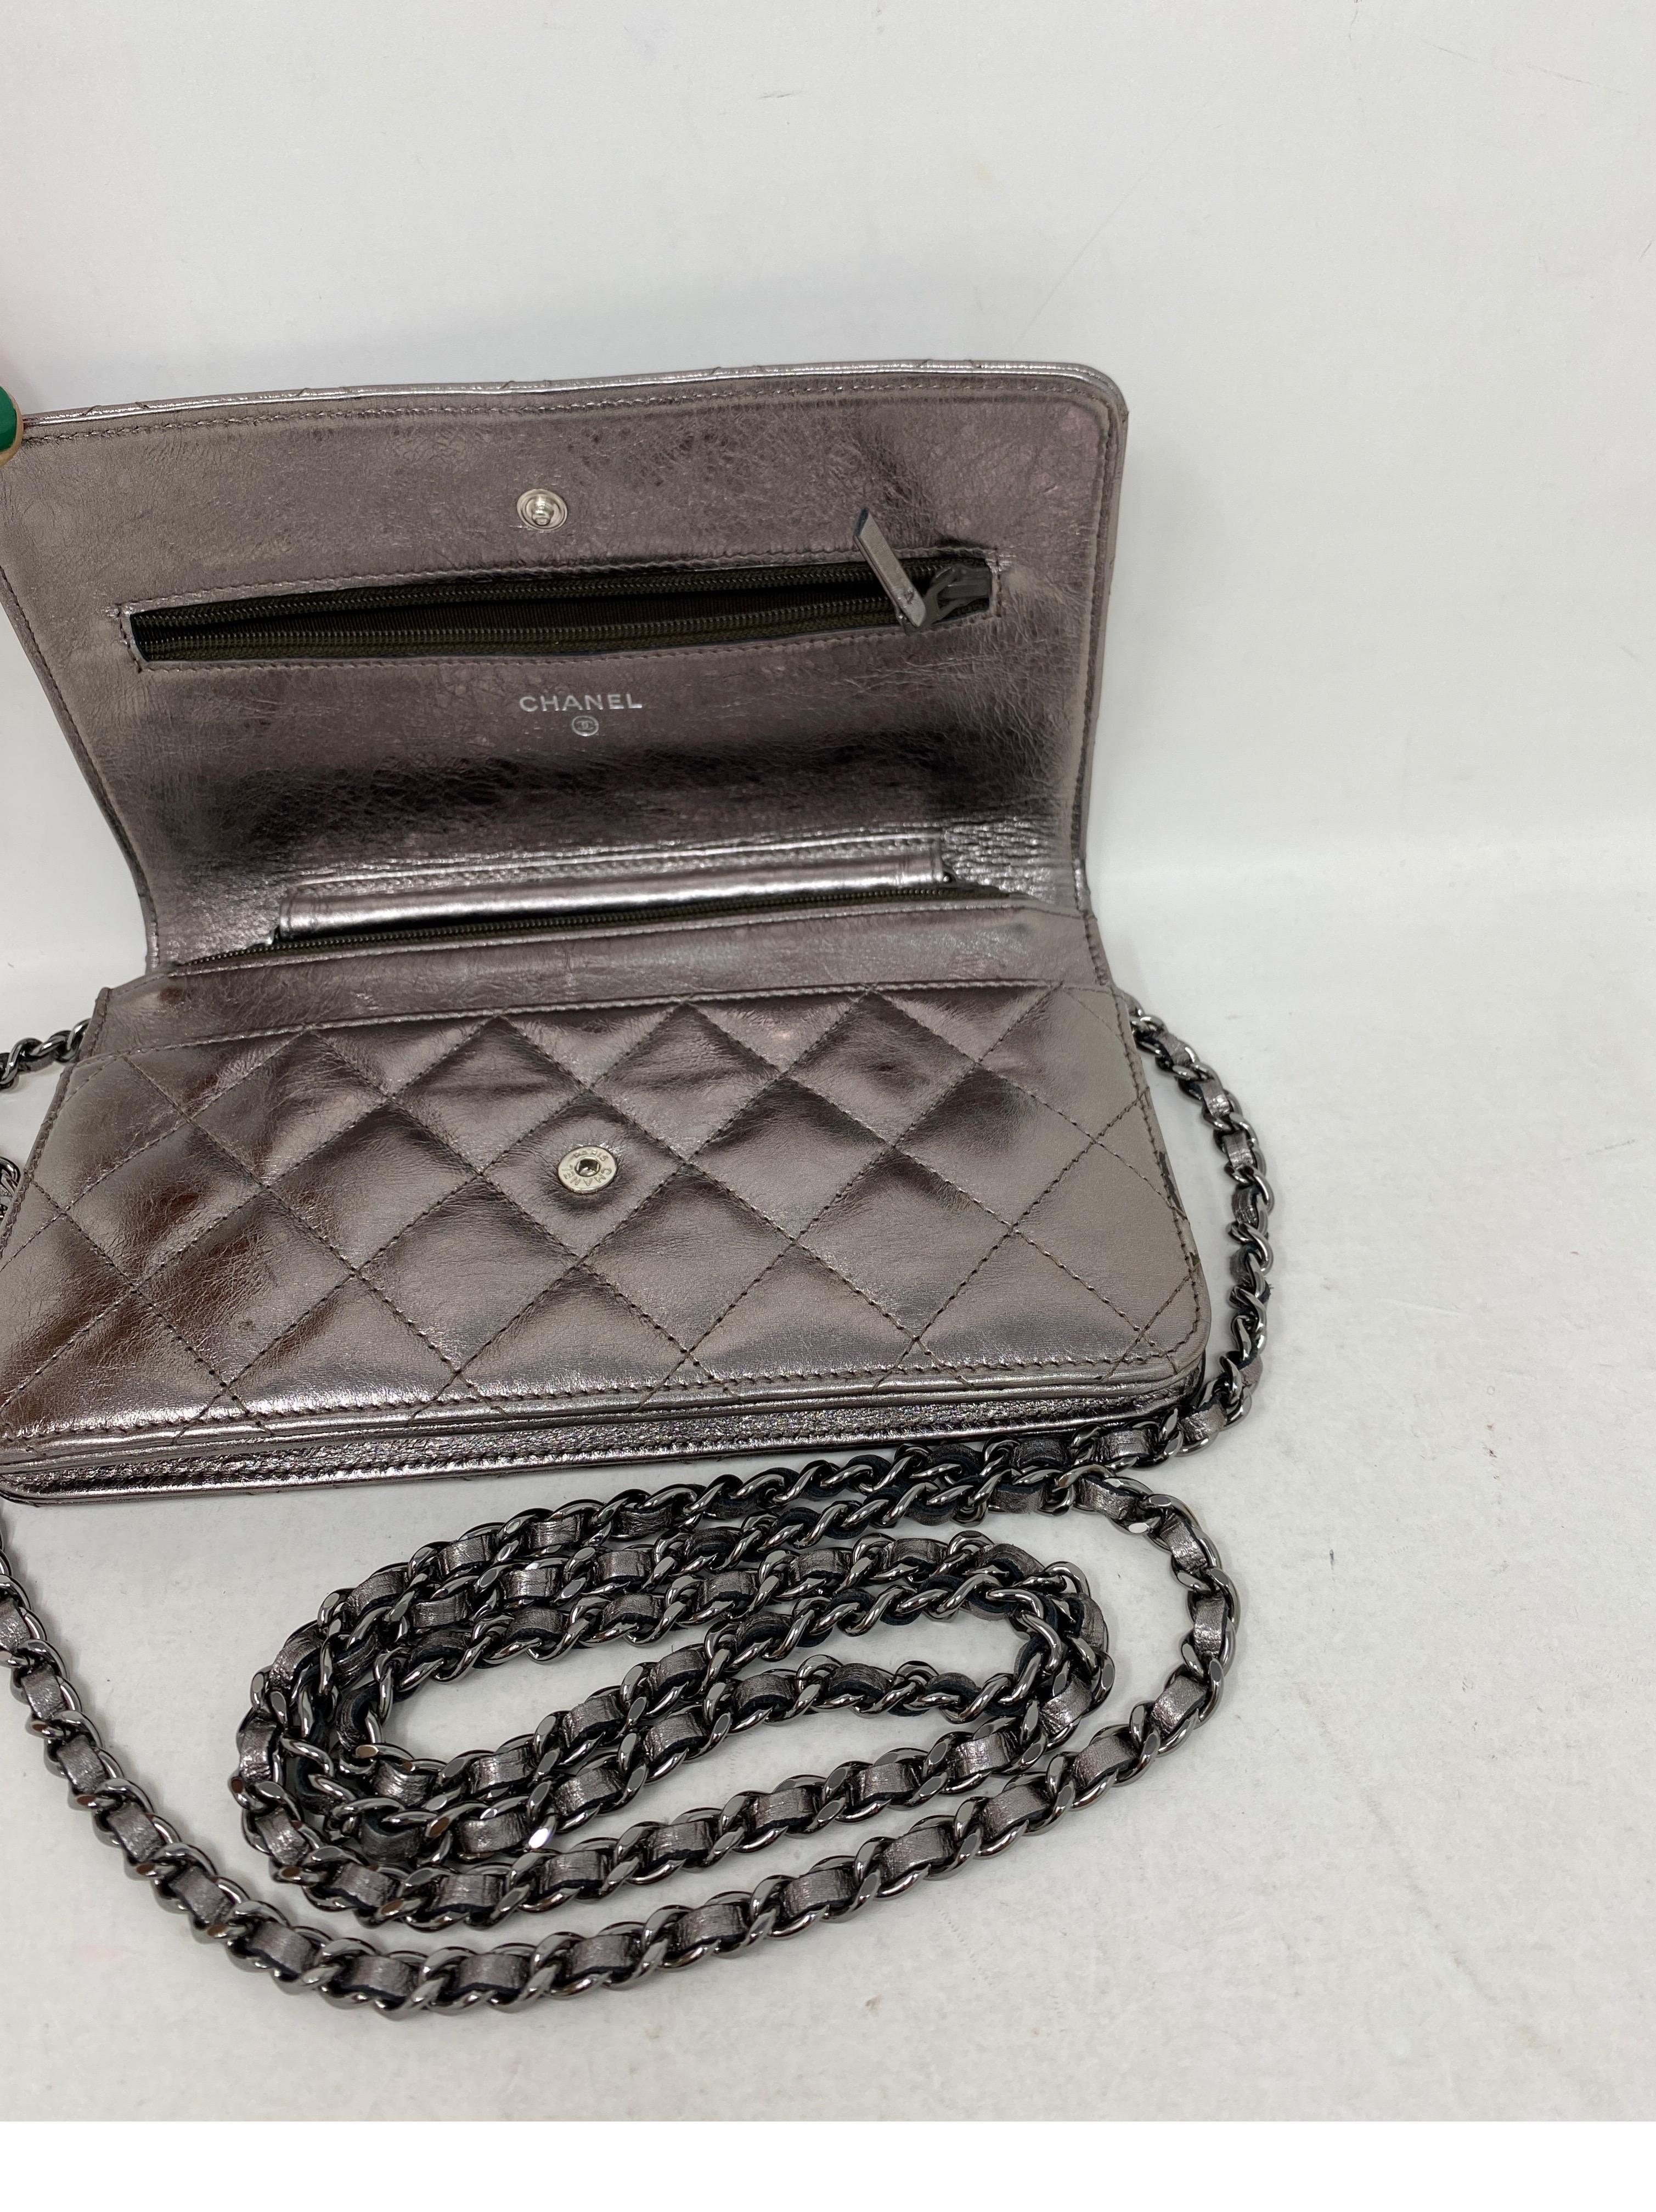 Chanel Silver Metallic Reissue Wallet On A Chain Bag 4